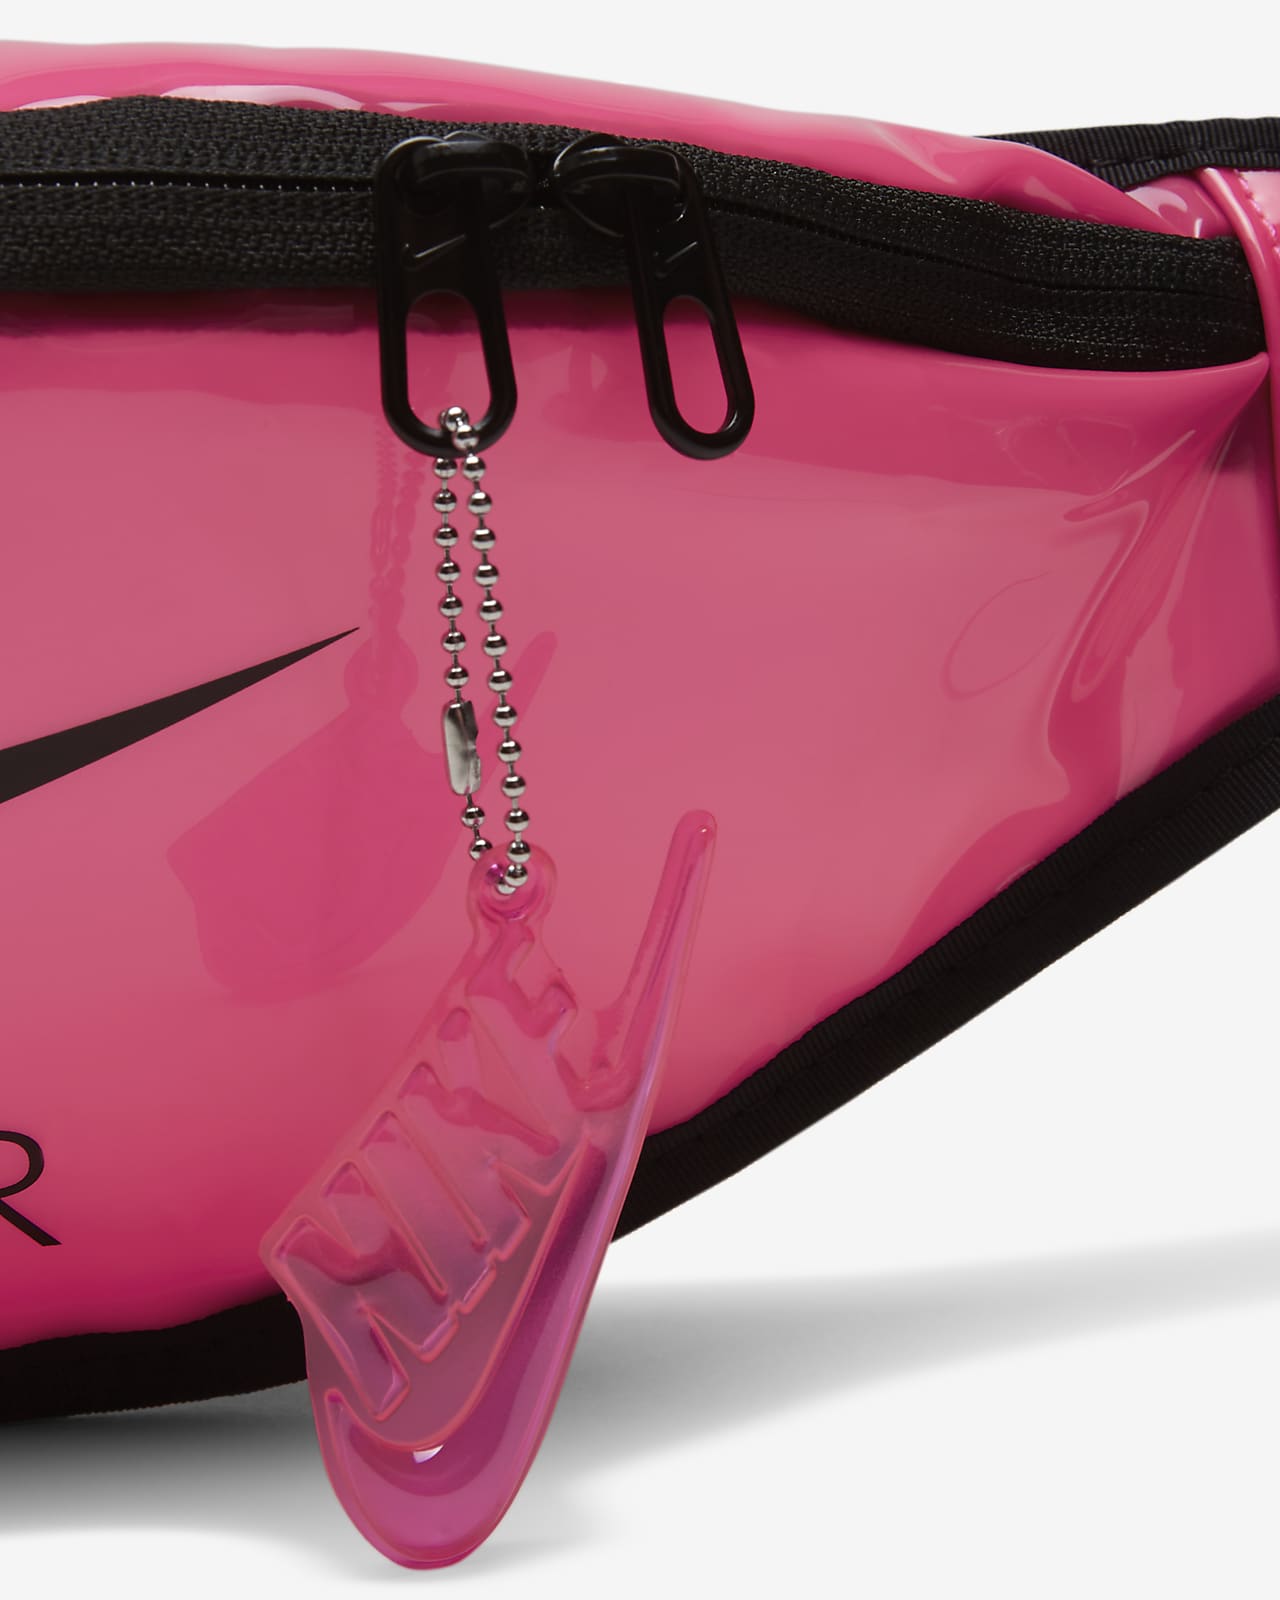 clear fanny pack nike